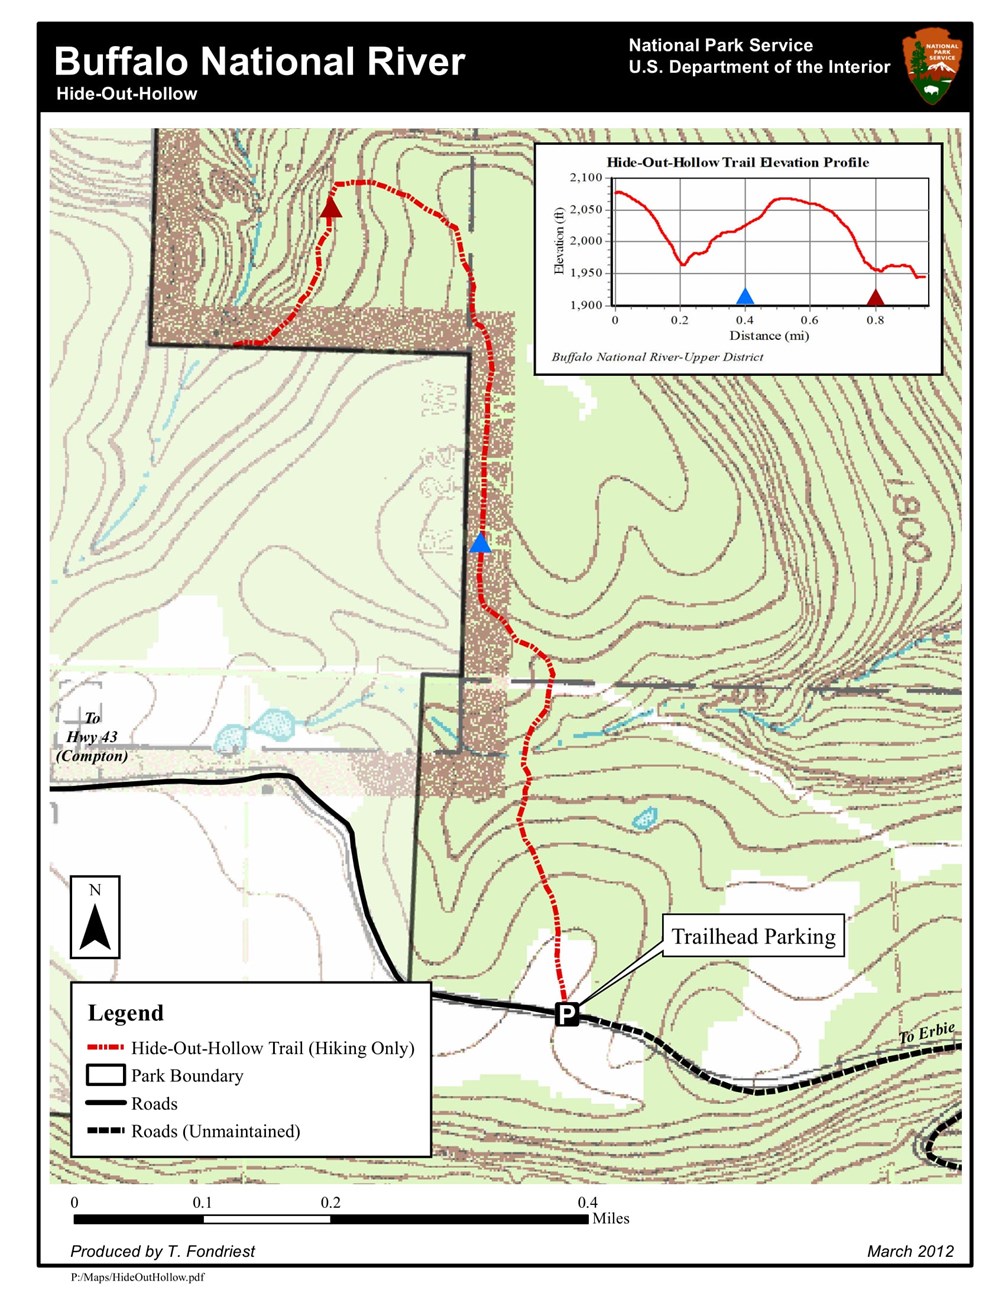 A detailed map of the Hideout Hollow Trail